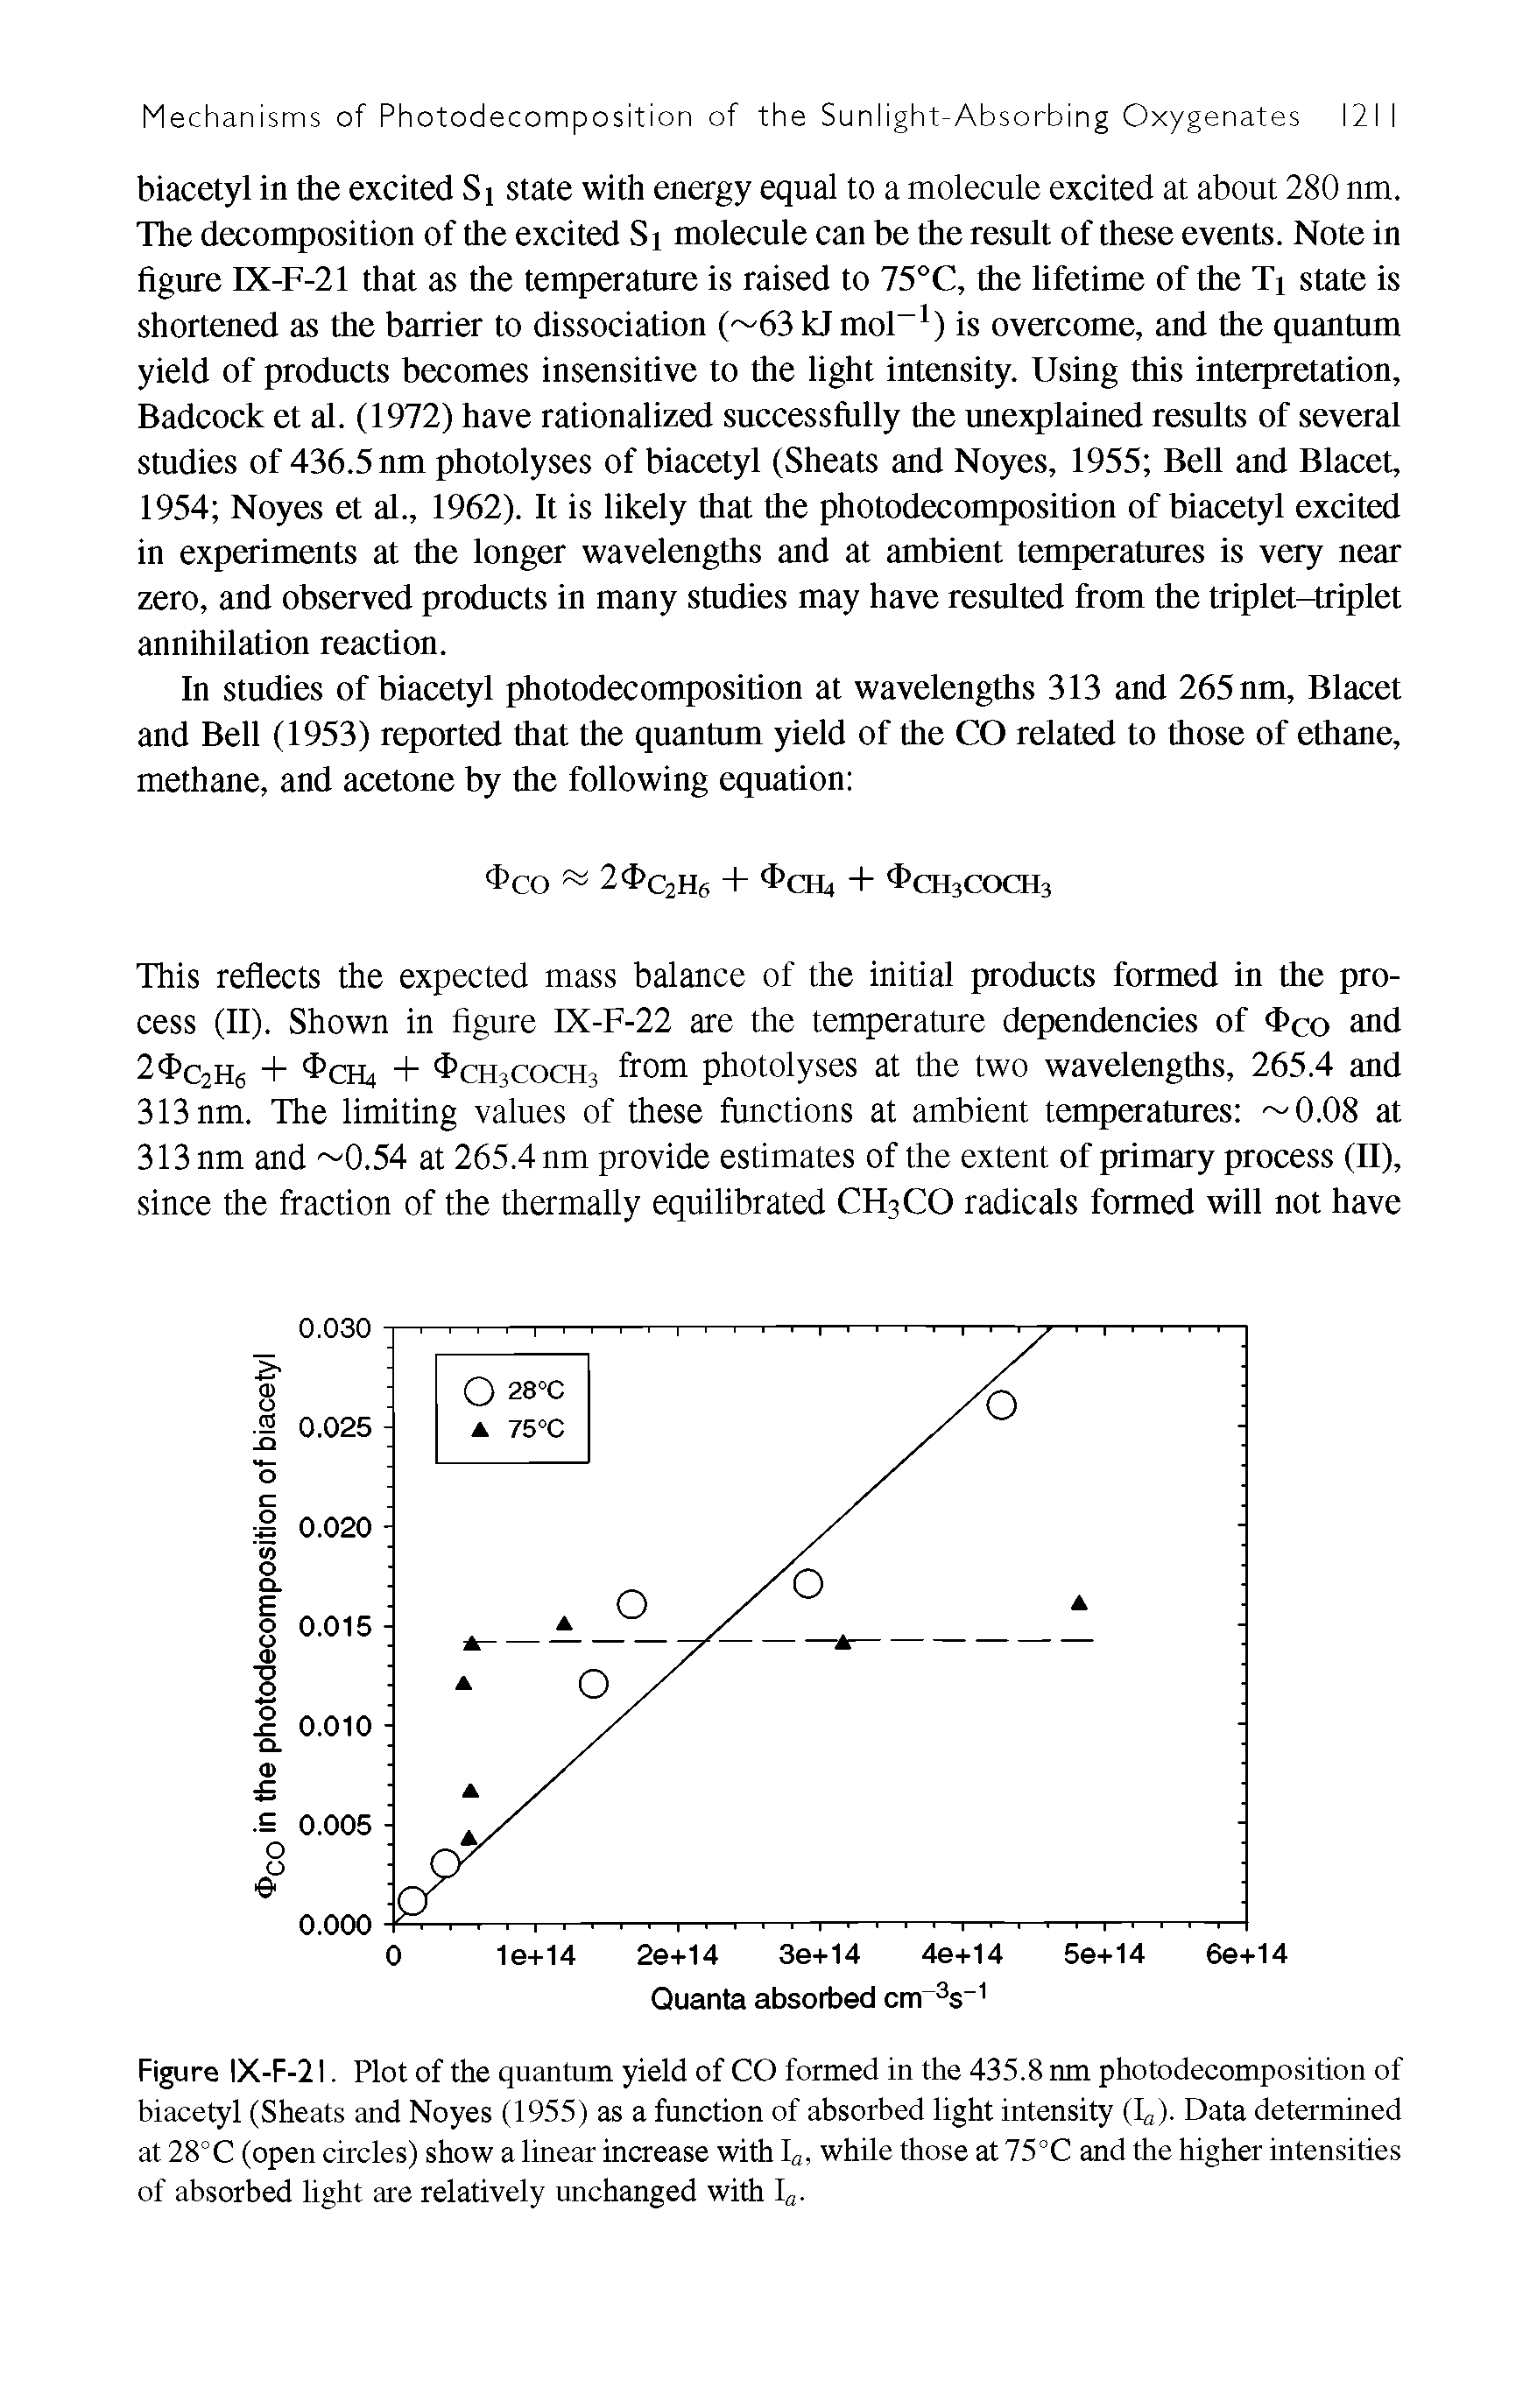 Figure IX-F-21. Plot of the quantum yield of CO formed in the 435.8 nm photodecomposition of biacetyl (Sheats and Noyes (1955) as a function of absorbed light intensity (fj). Data determined at 28°C (open circles) show a linear increase with D, while those at 75°C and the higher intensities of absorbed light are relatively unchanged with D.